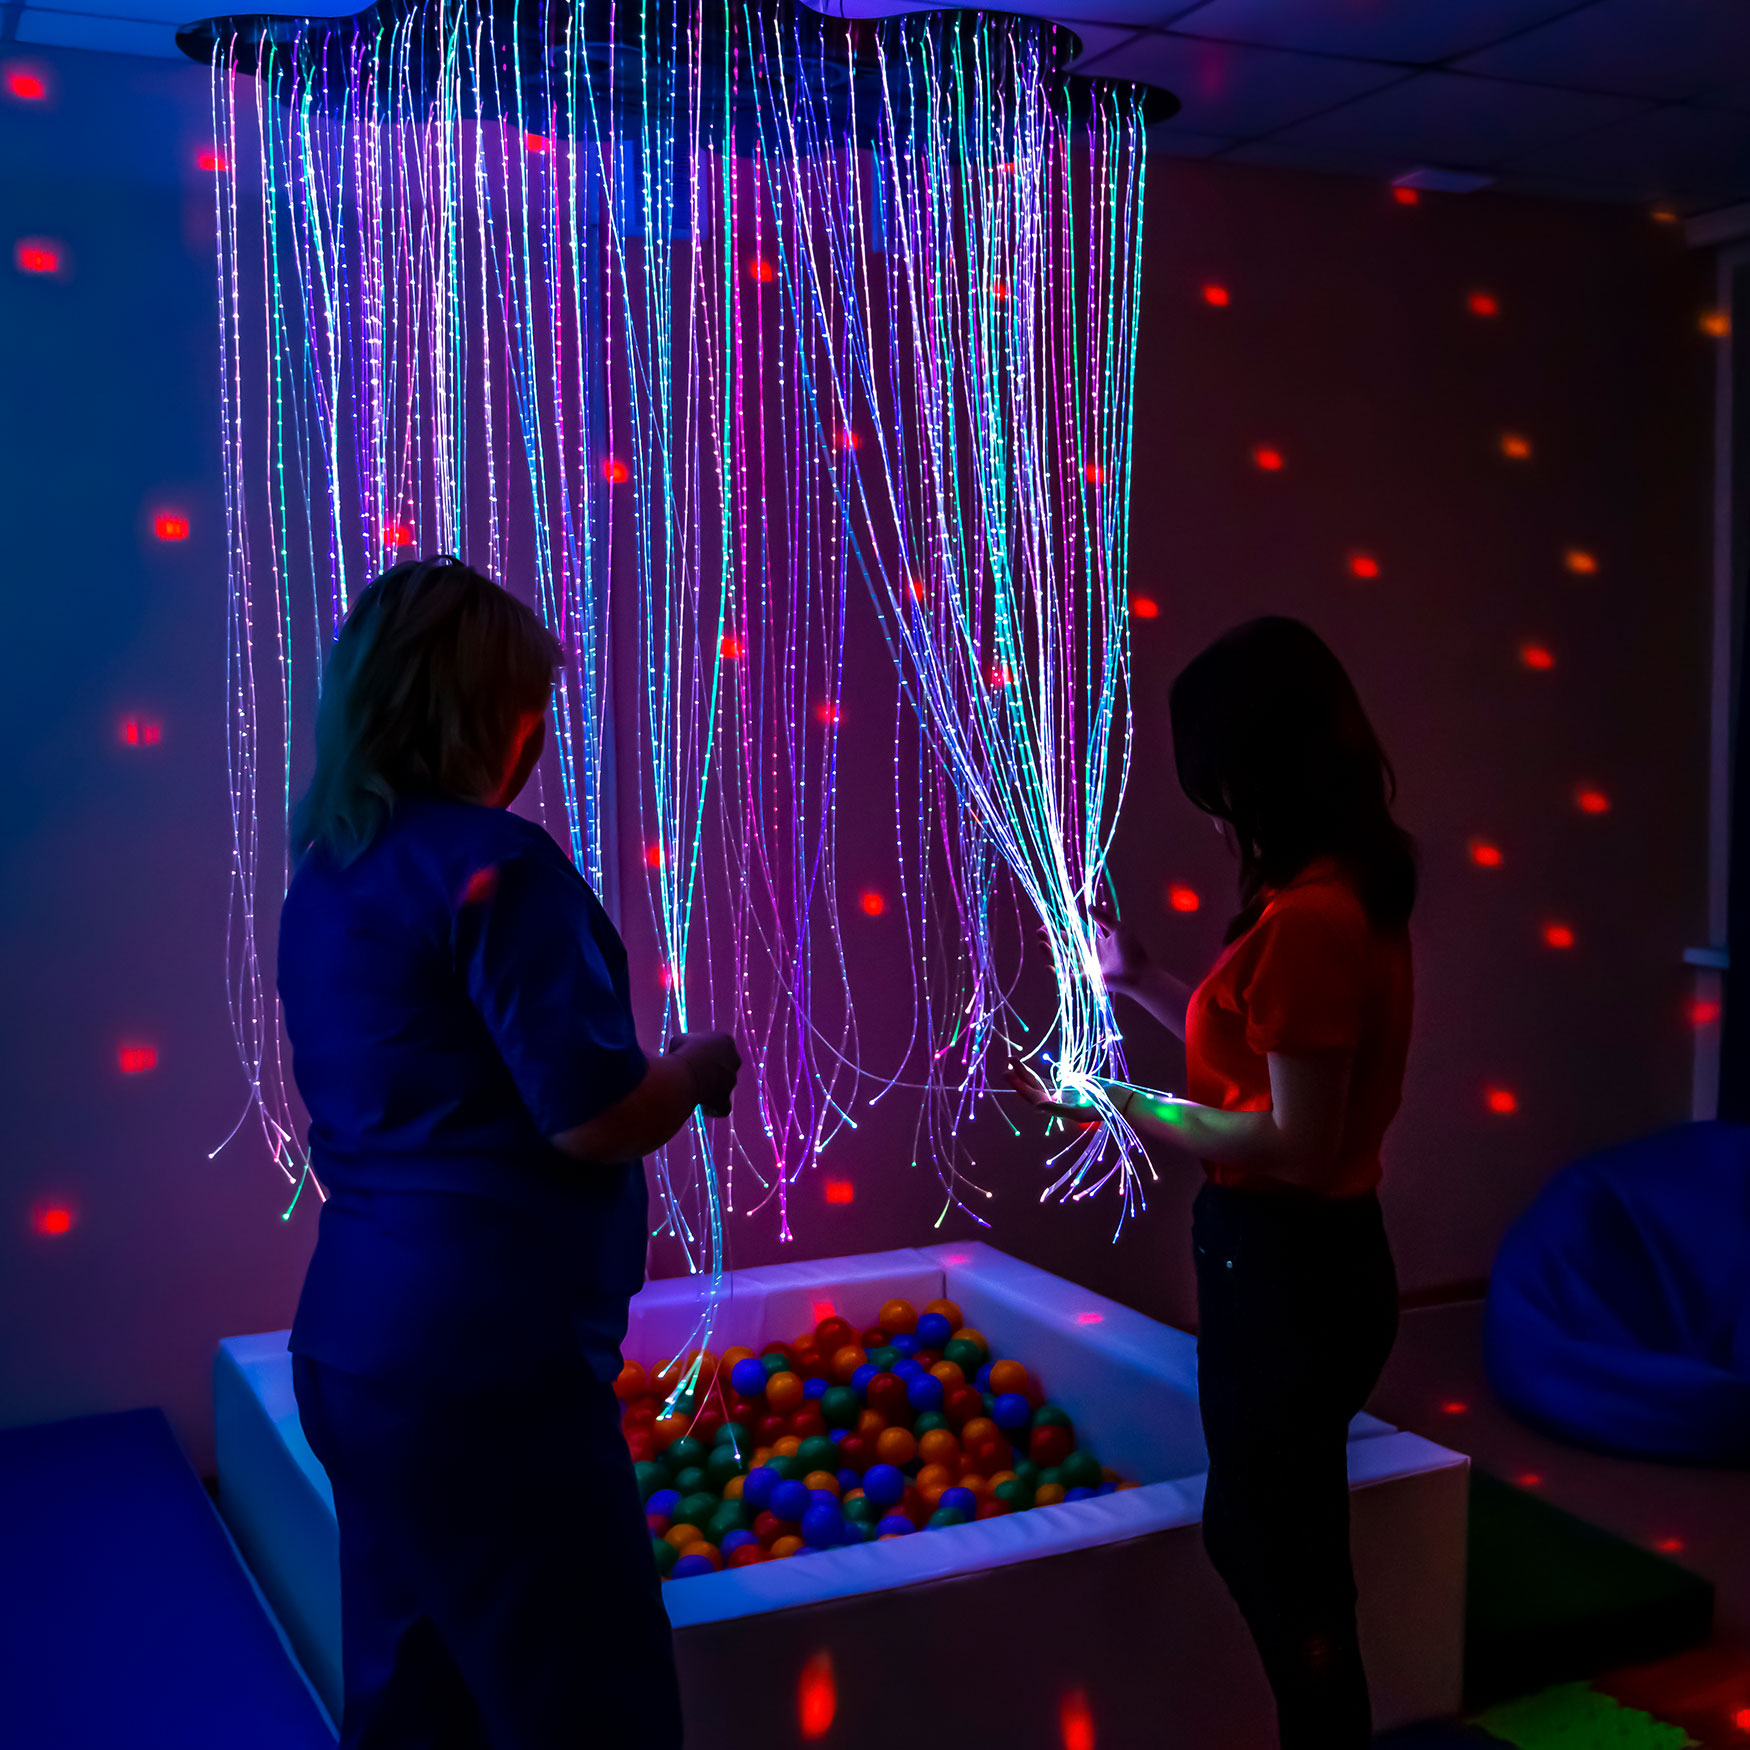 What should be in a sensory room for autism?